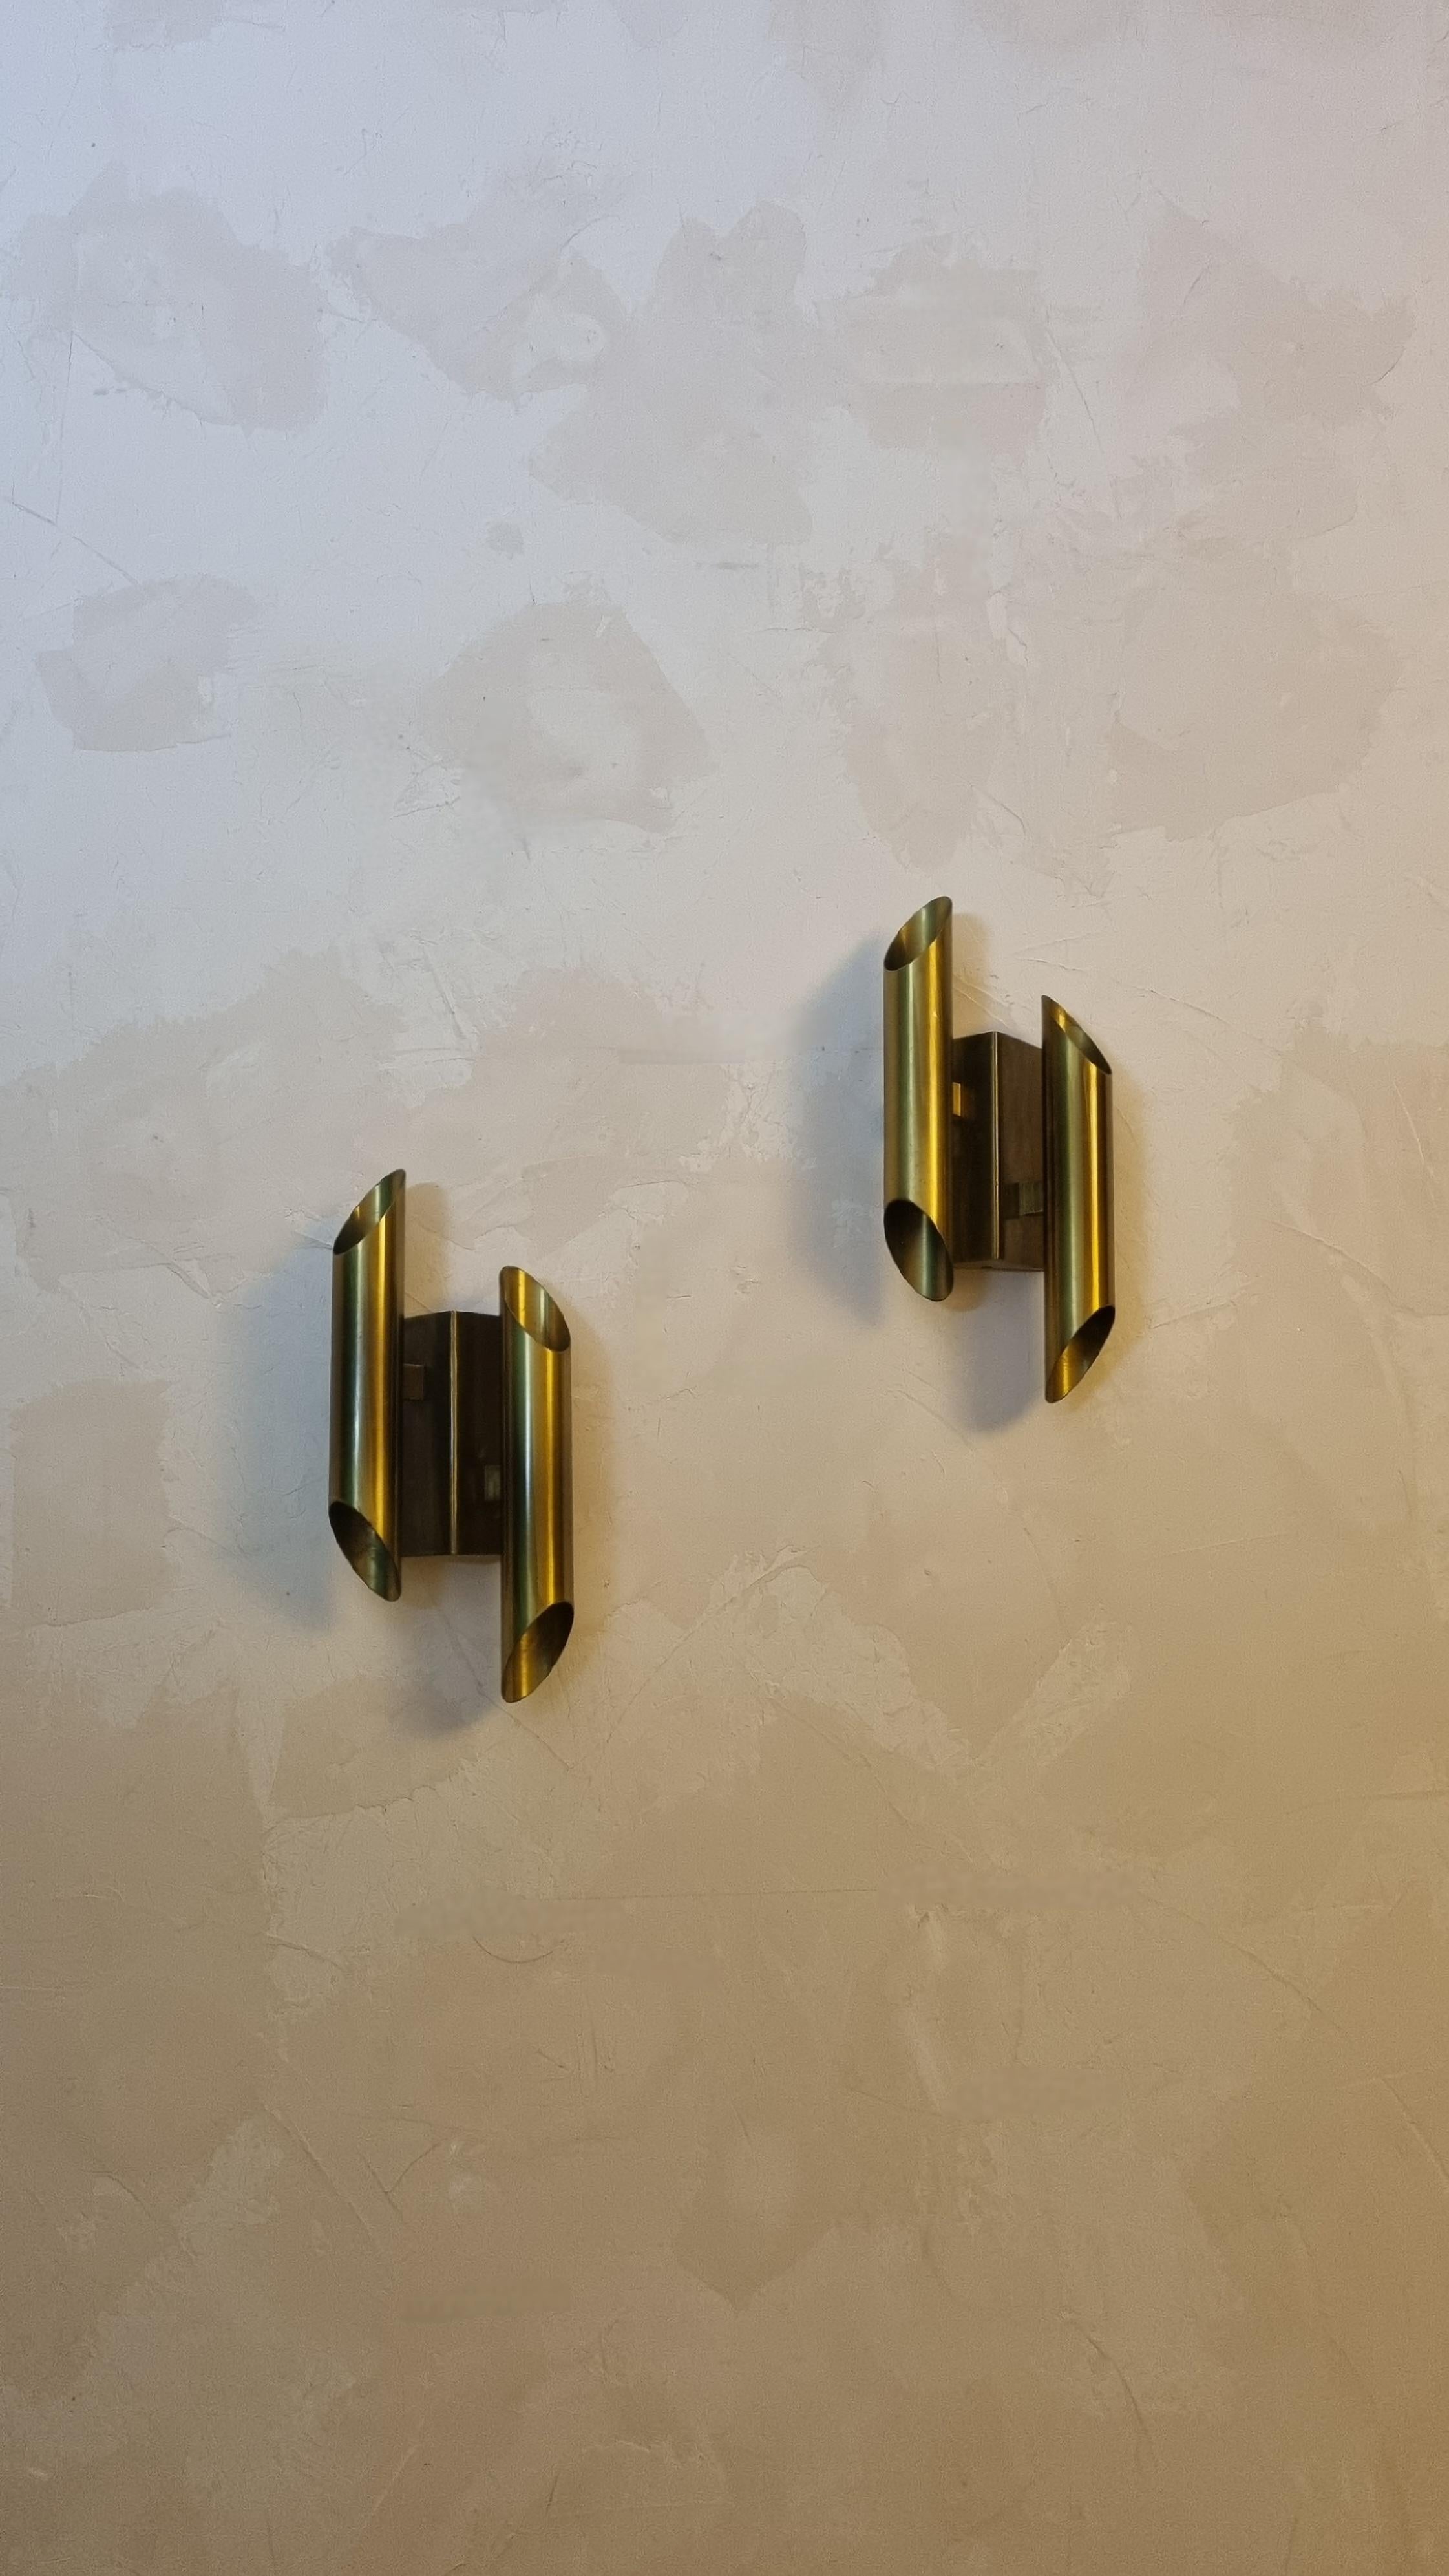 Rare set of 2 Artichoke wall lamps  designed by Gianni Celada for Fontana Arte in 1970.
Brass structure, 4 light points, original wiring overhauled.

Born in Milan in 1935, he graduated in Architecture at the Polytechnic, where in 1986 he became